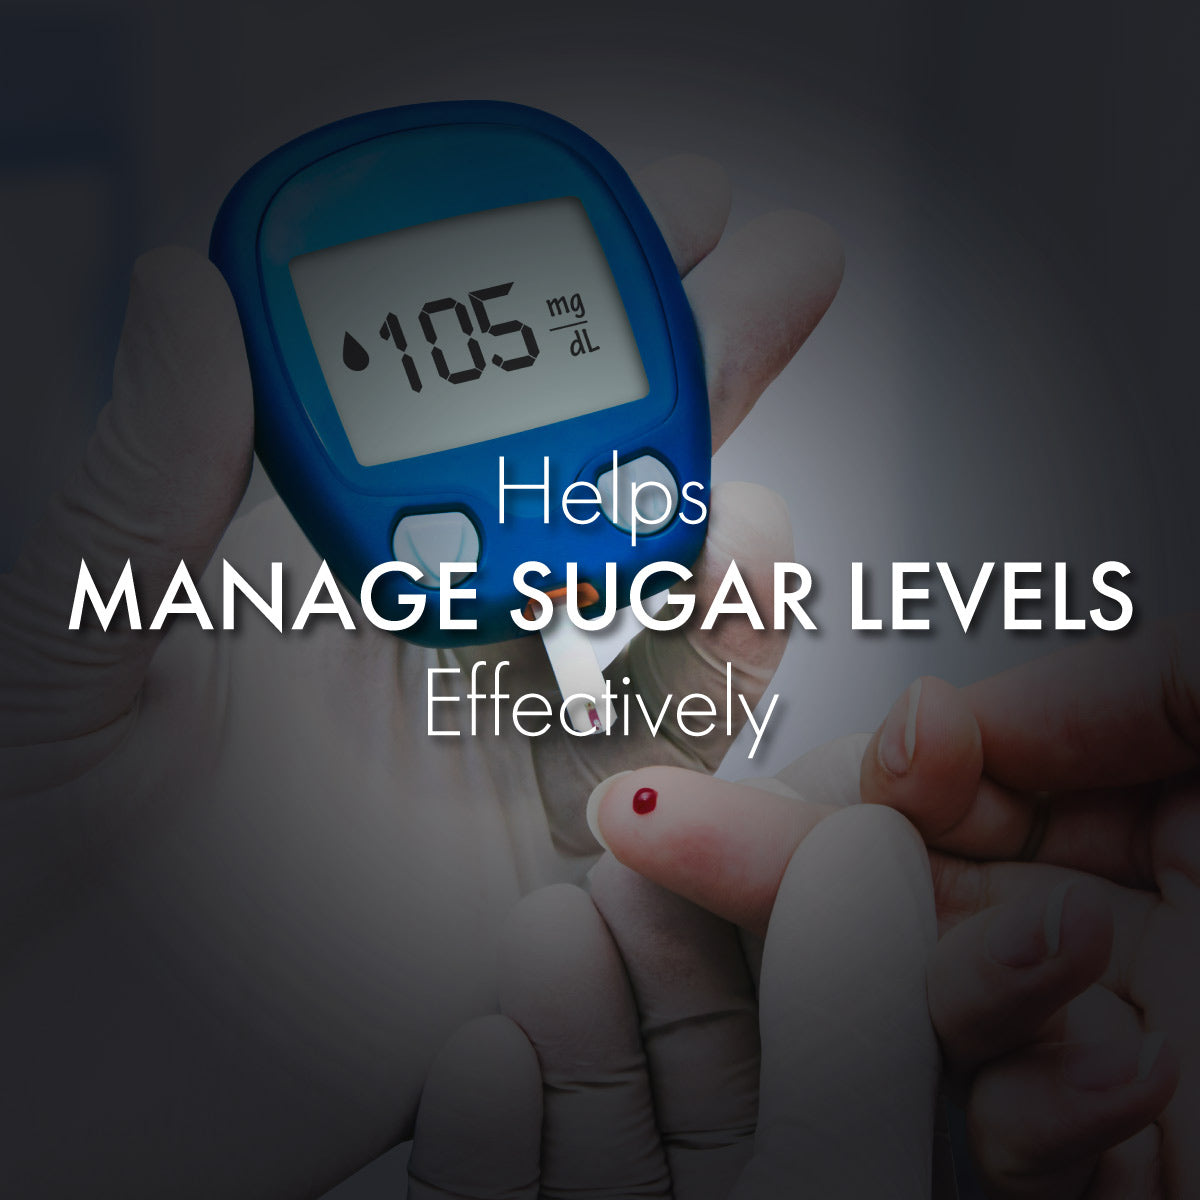 Sugar-Free Pack: For Men With Diabetes-related Performance Difficulties